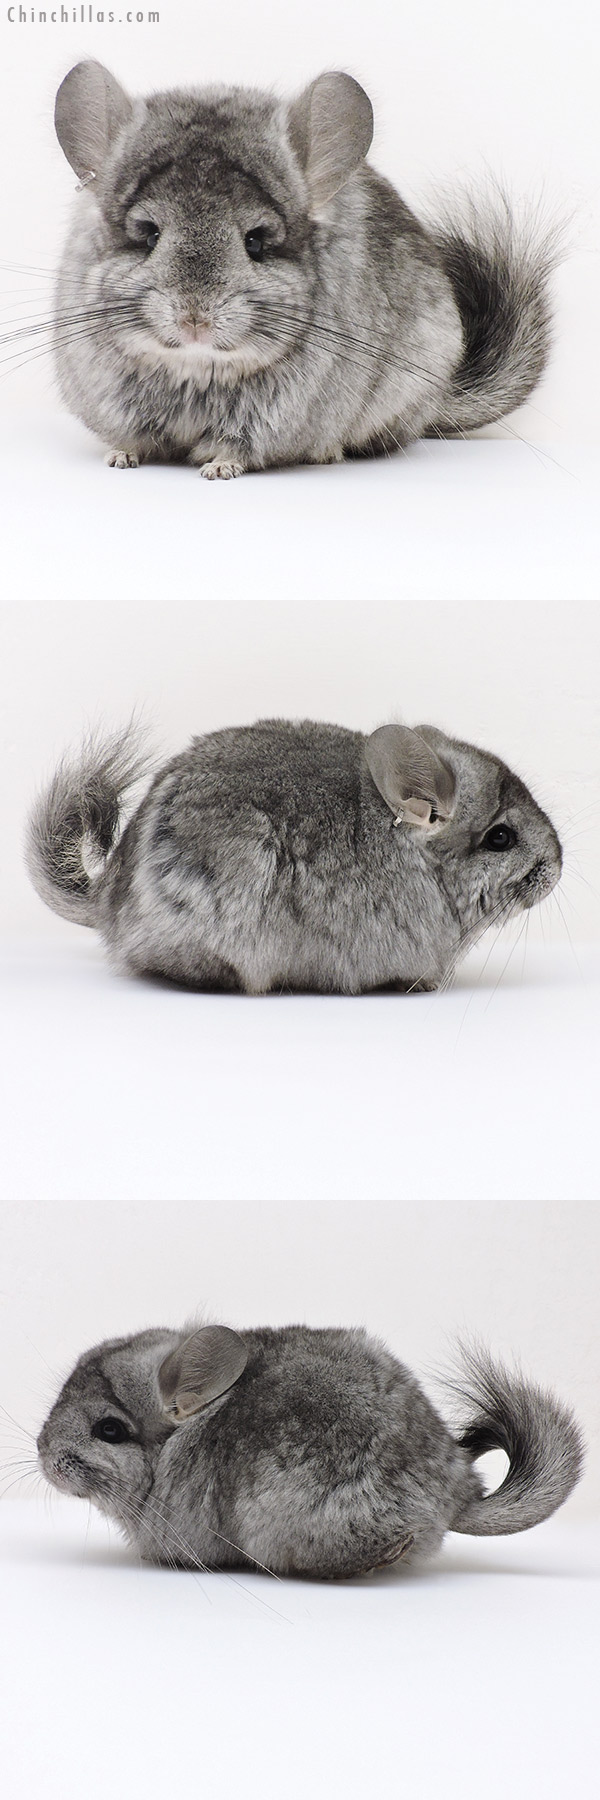 Chinchilla or related item offered for sale or export on Chinchillas.com - 17179 Standard  Royal Persian Angora ( Ebony & Locken Carrier ) Female Chinchilla